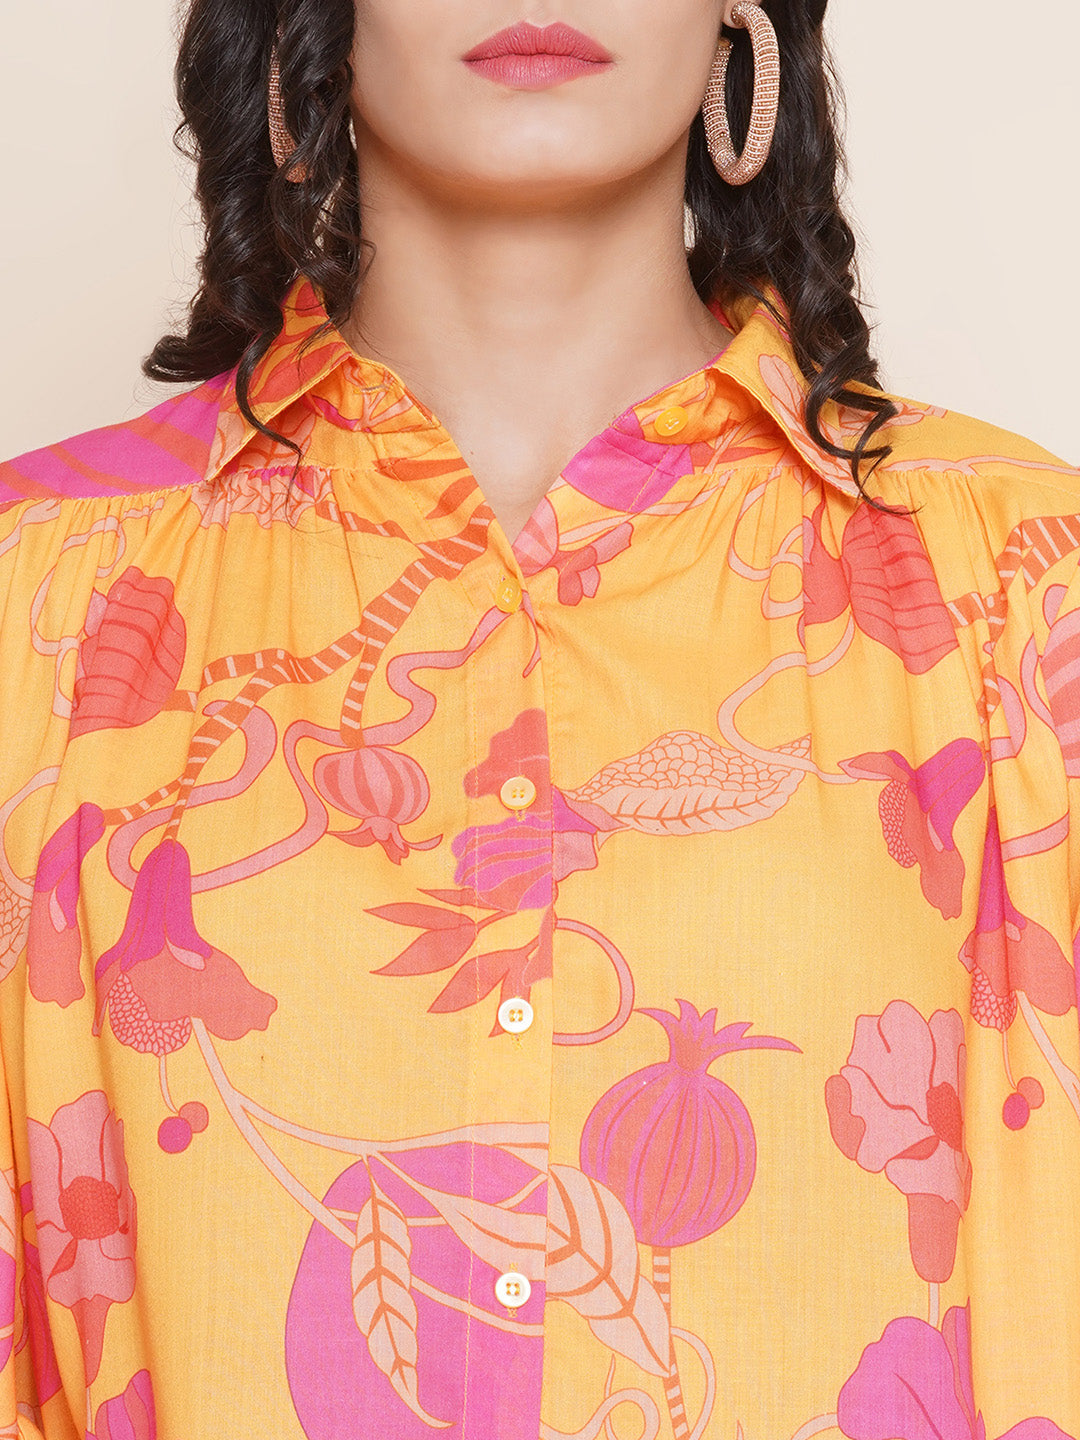 Bhama Couture Mustard Yellow Printed Shirt Style Top